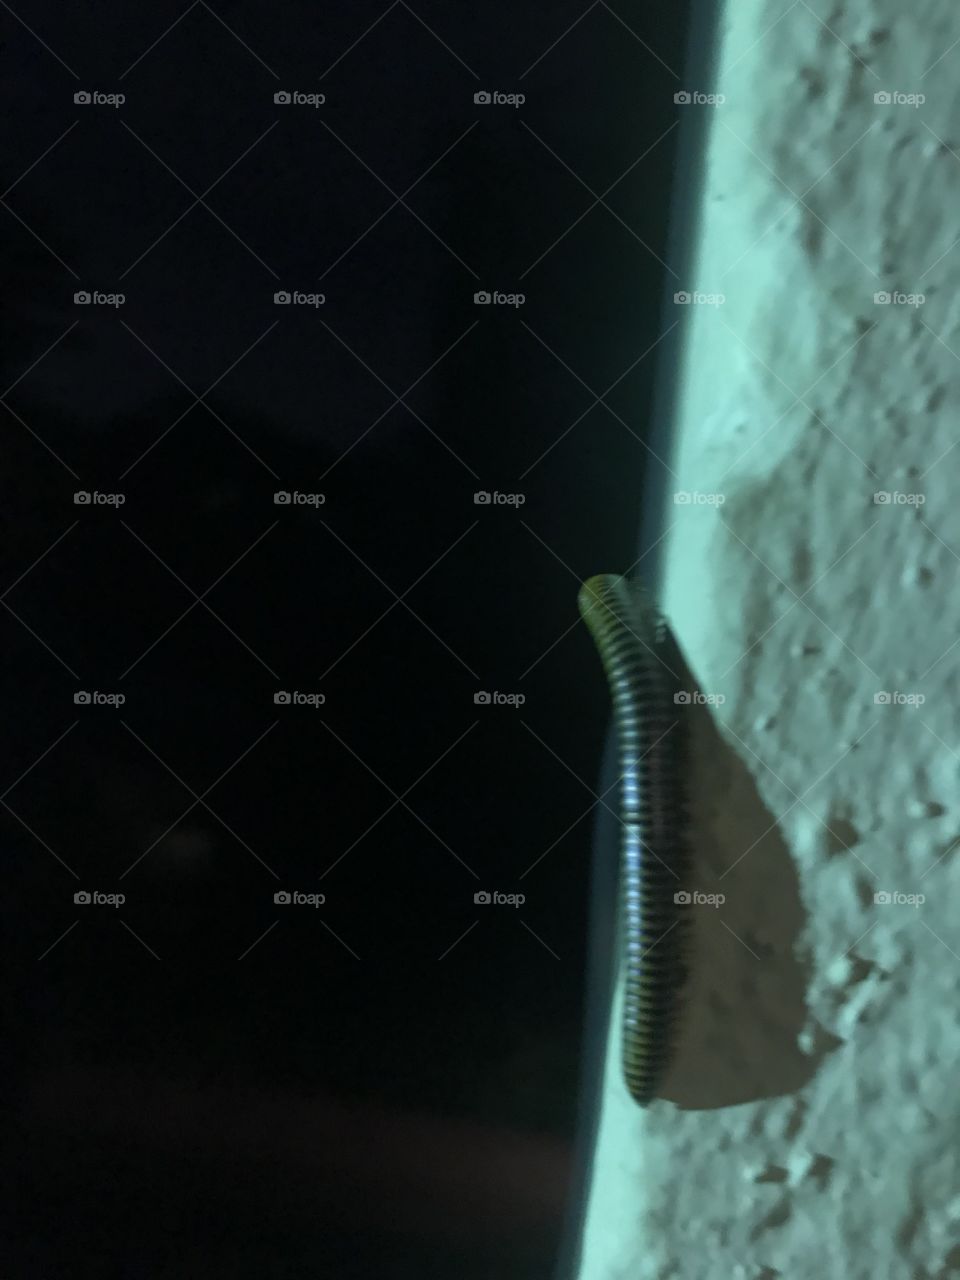 Centipede on the wall at night 🐛